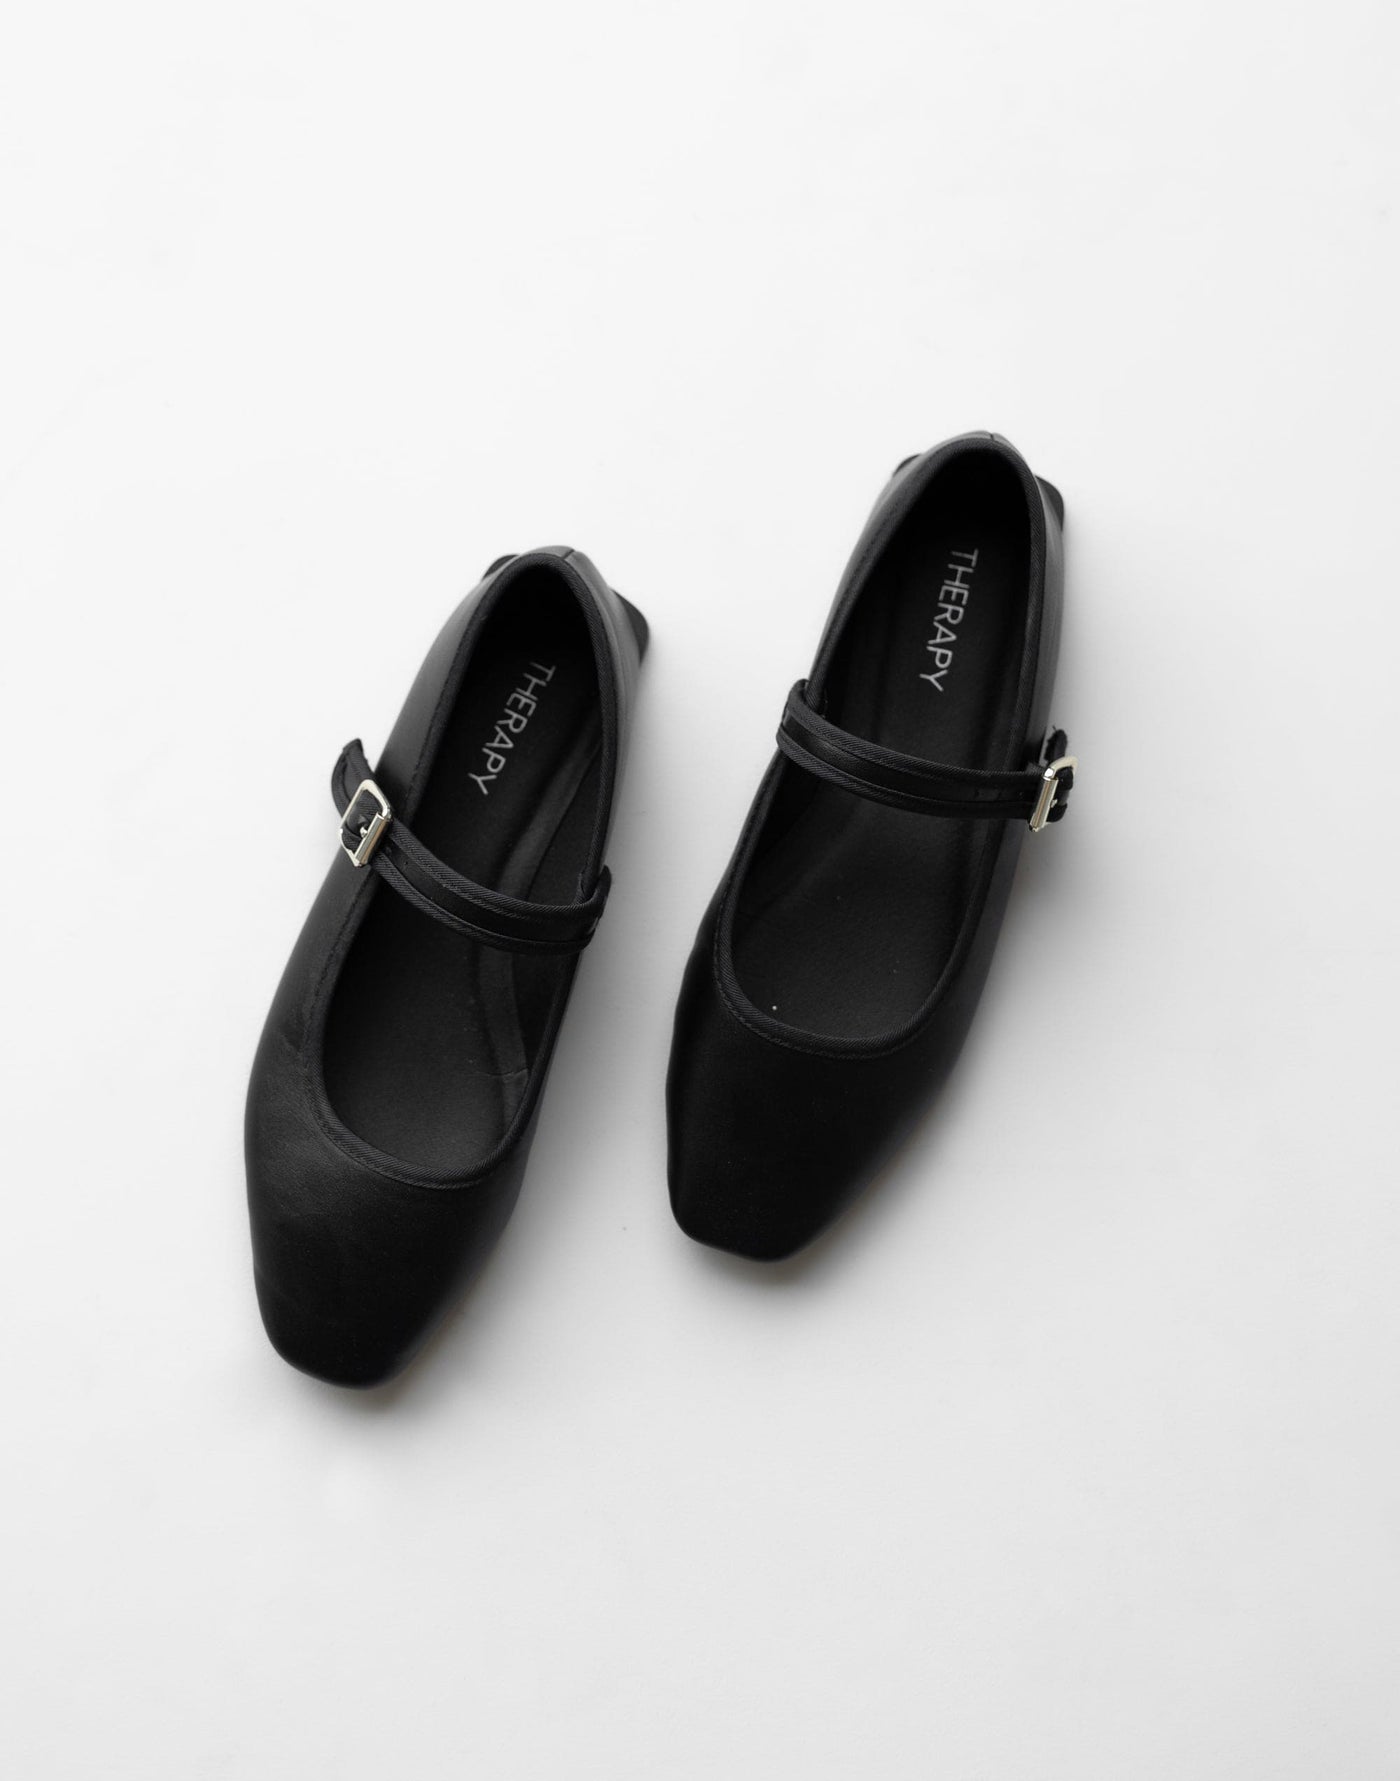 Faze Ballet Flat (Black Smooth PU) - By Therapy - Upper Strap Detail Simple Flats - Women's Shoes - Charcoal Clothing